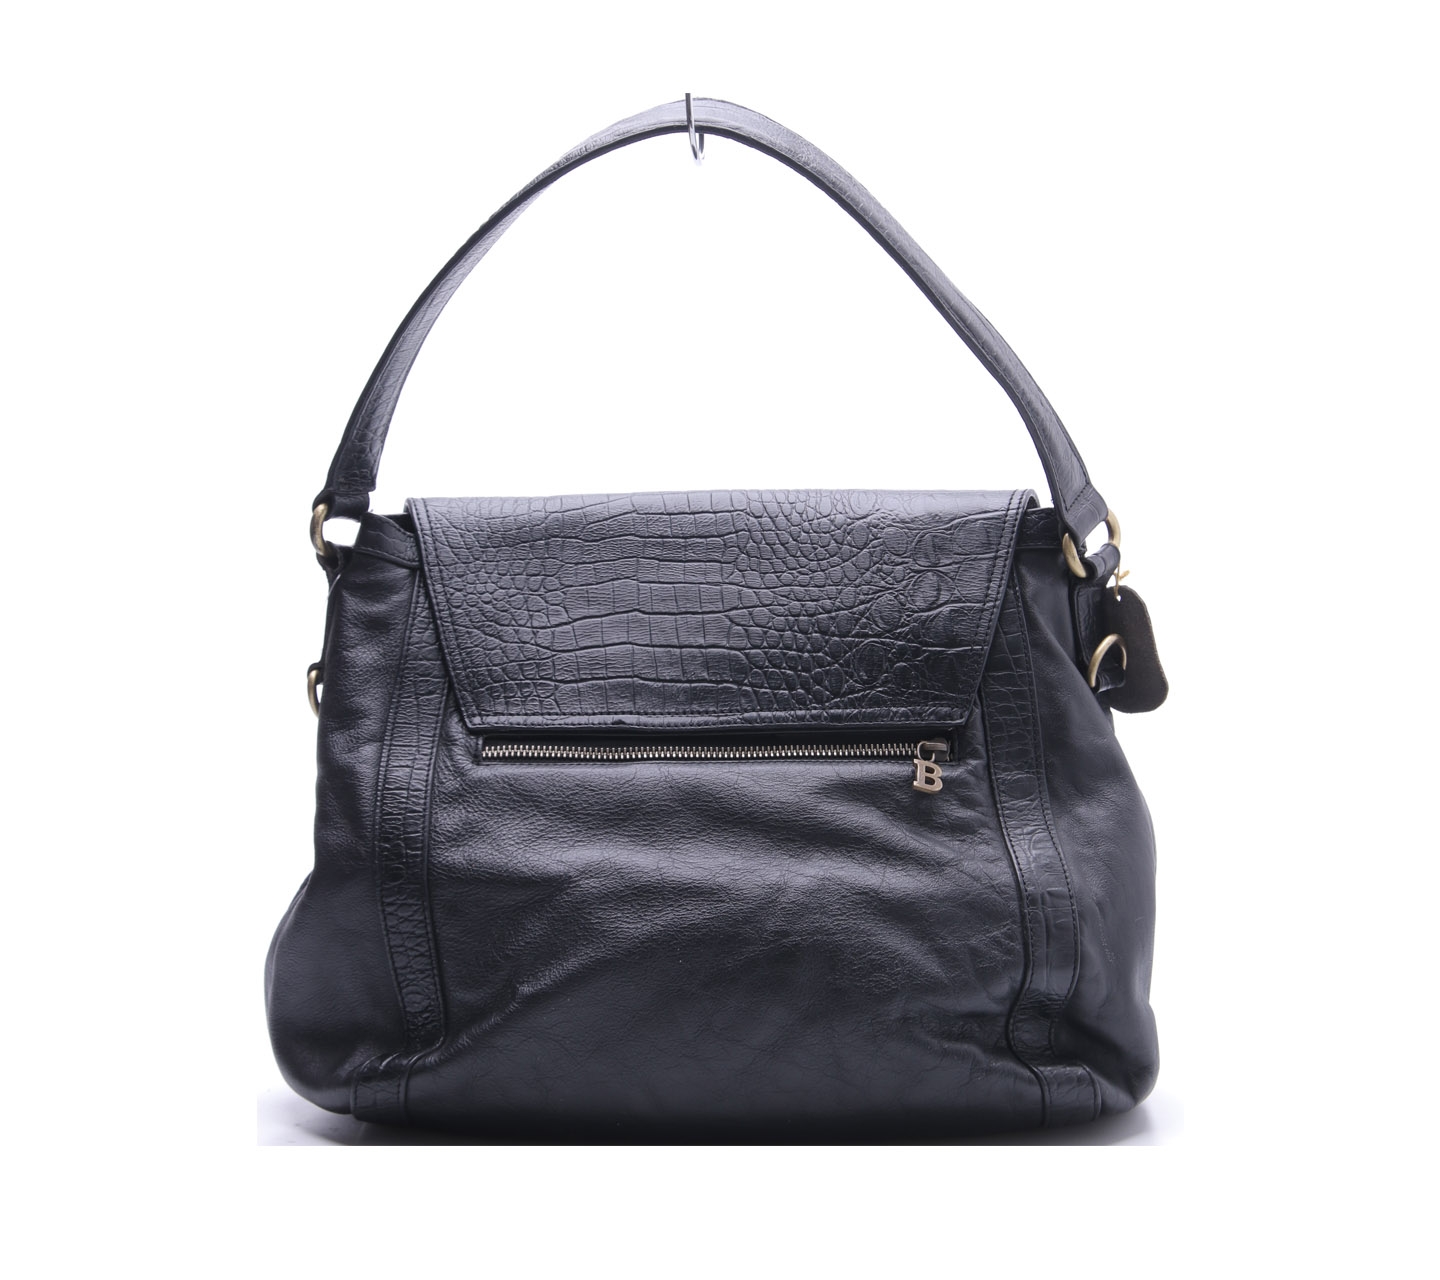 Bally Croco Embossed Black Leather Flap